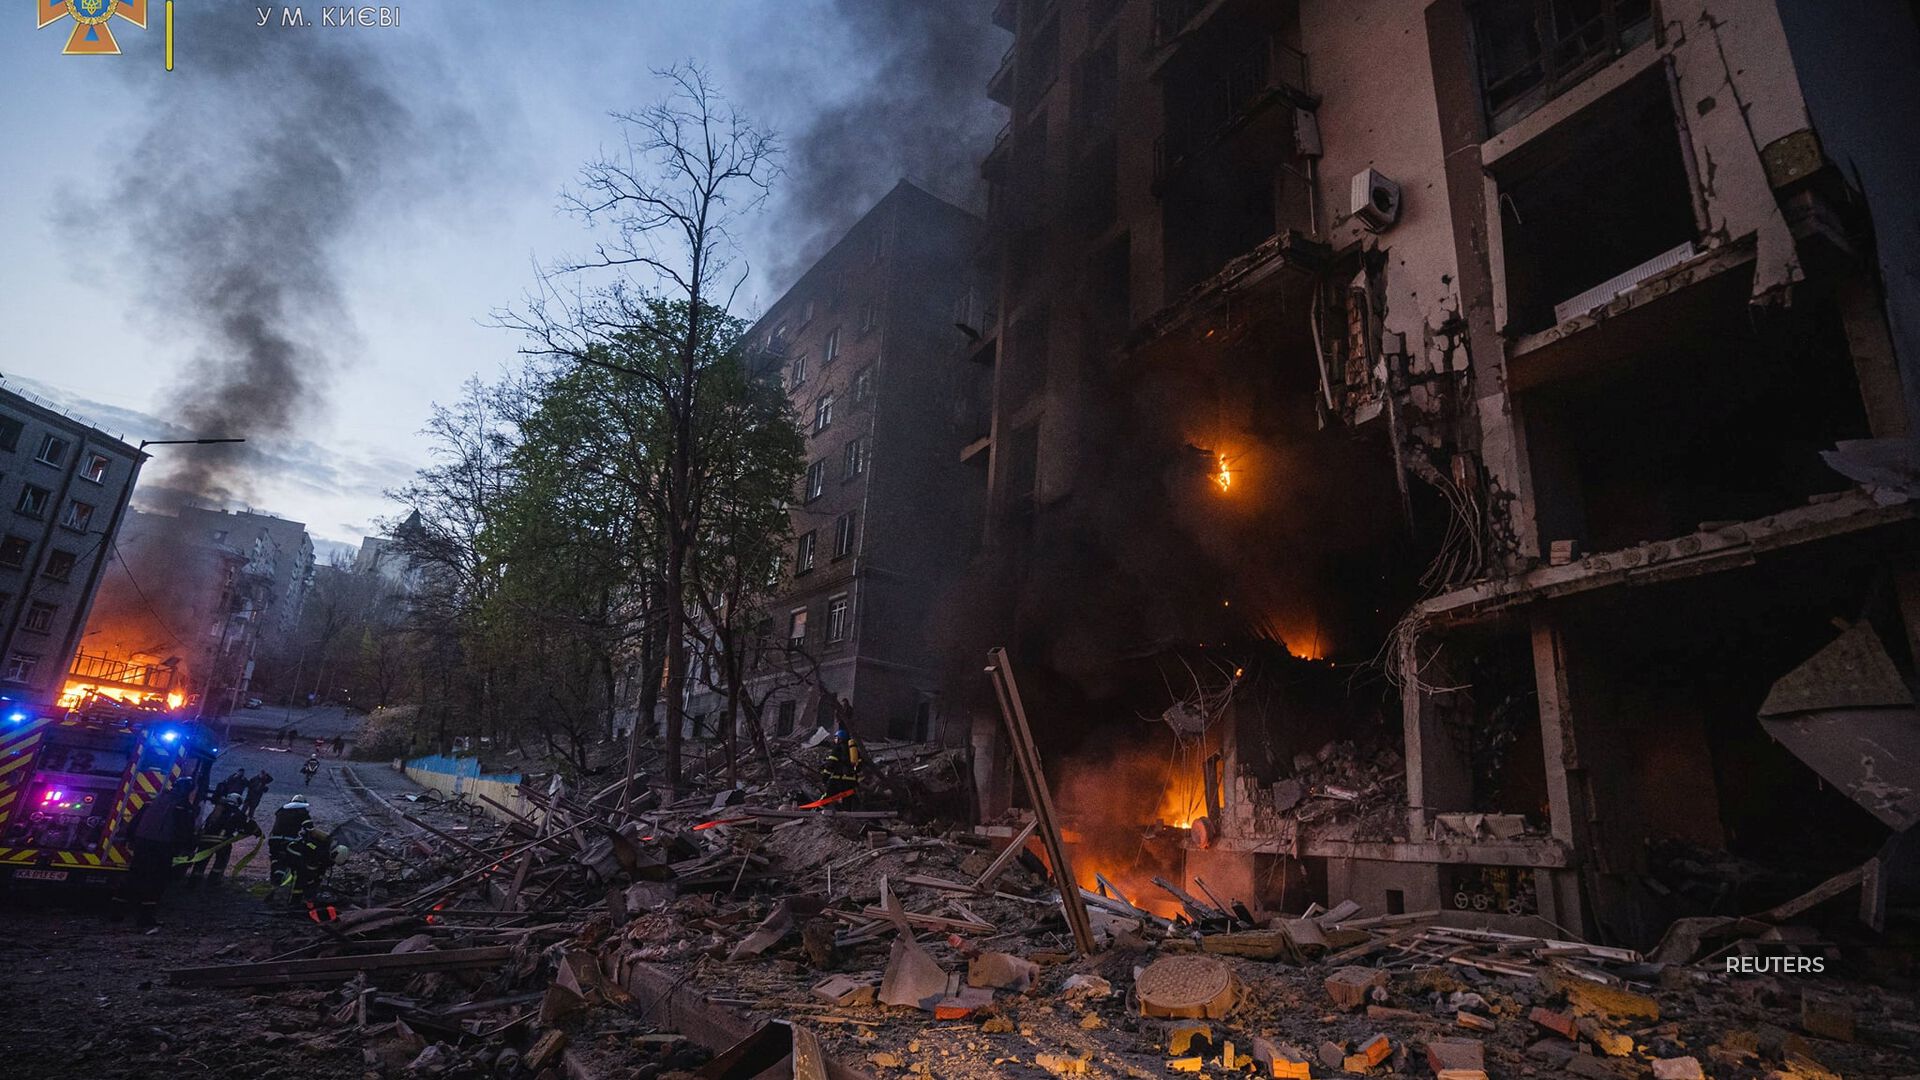 Russia launched attacks on Kyiv as the UN prepares to rescue Ukrainians in Mariupol.